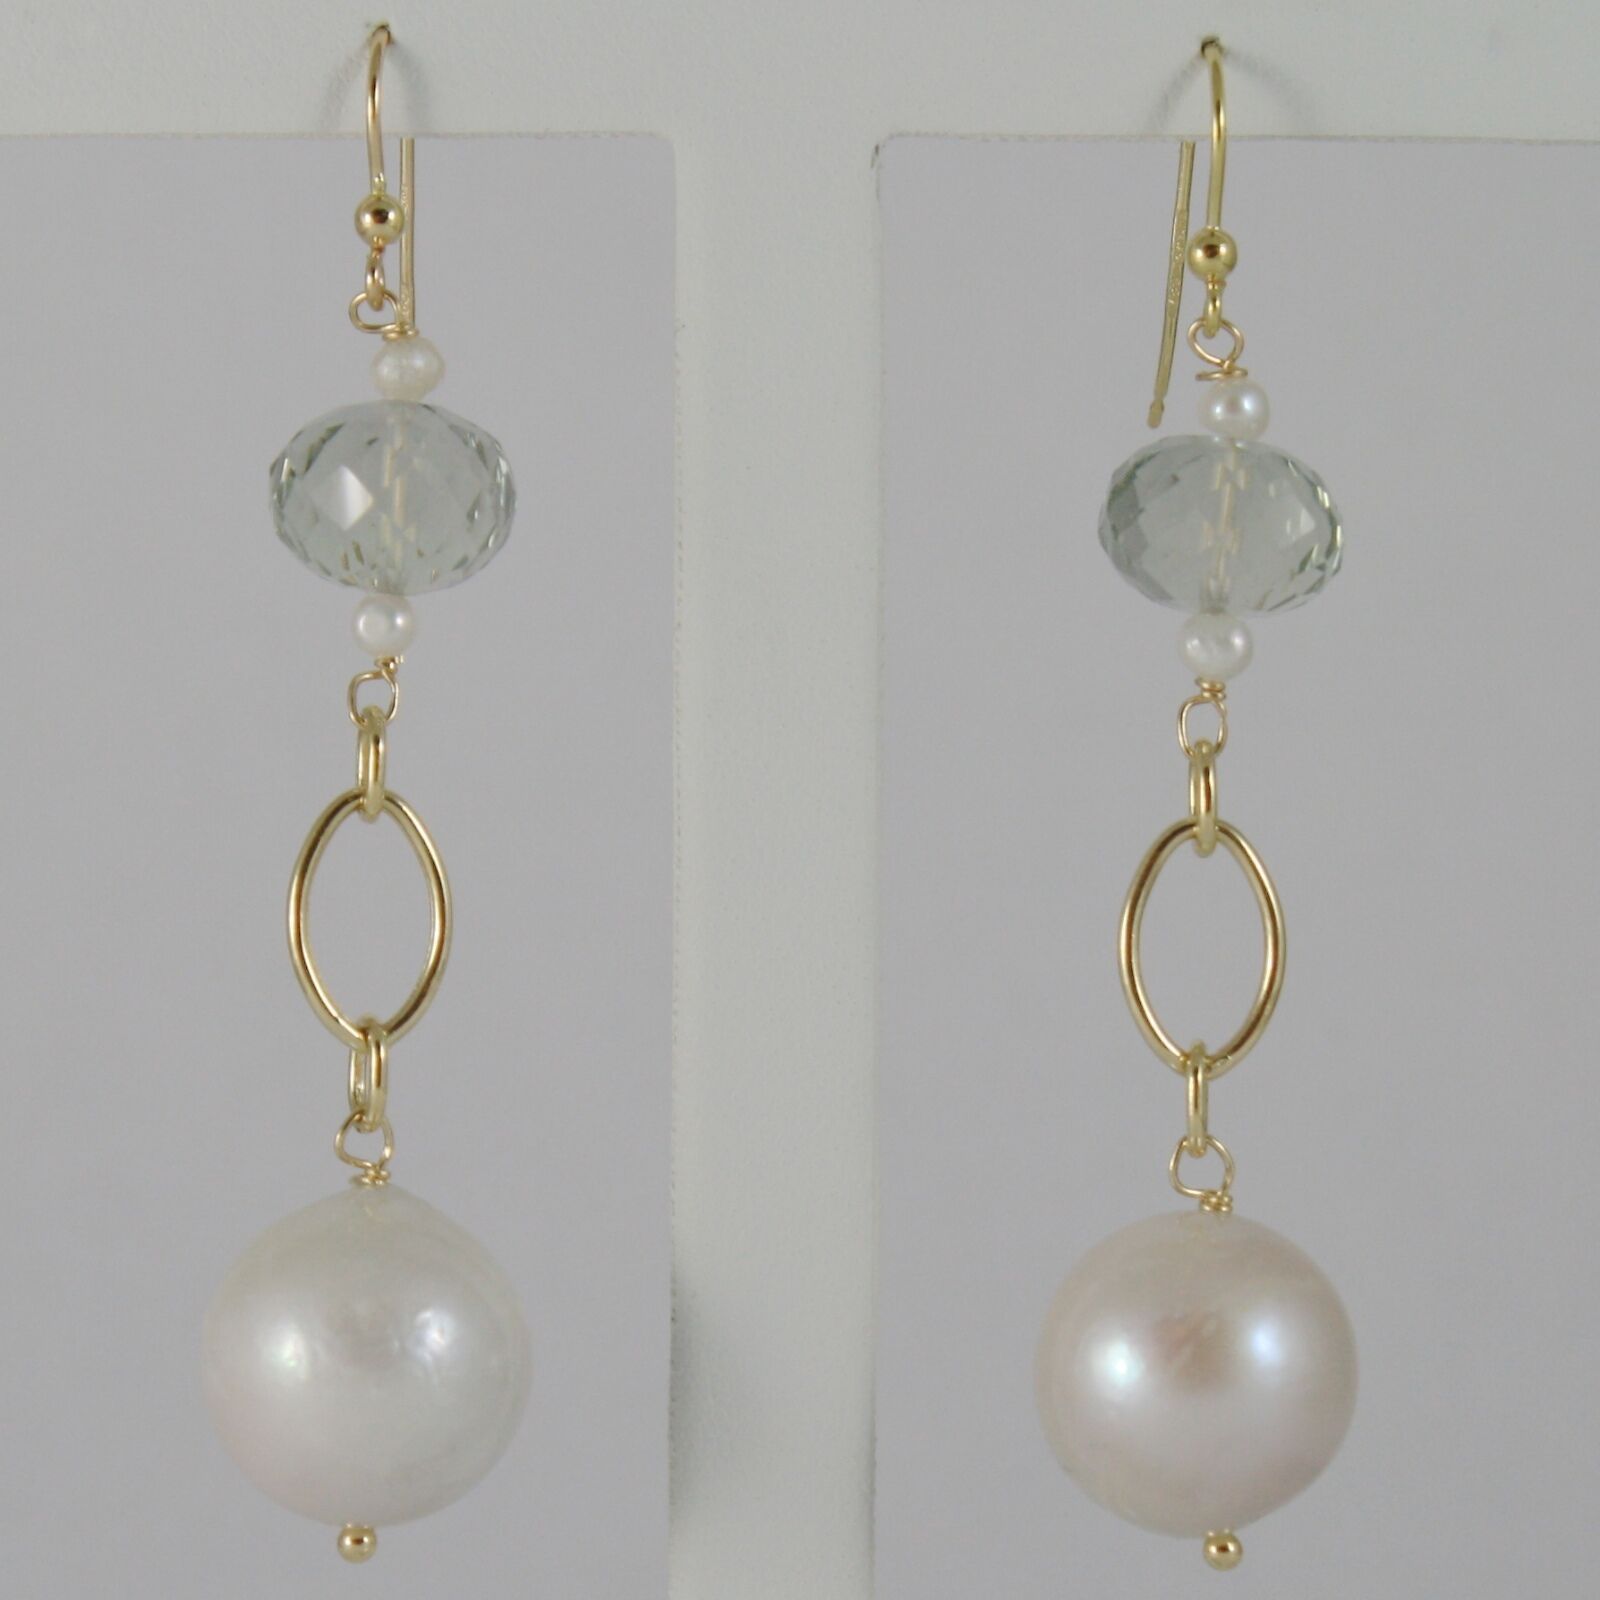 Primary image for 18K YELLOW GOLD PENDANT EARRINGS WITH BIG 12 MM WHITE FW PEARLS AND PRASIOLITE